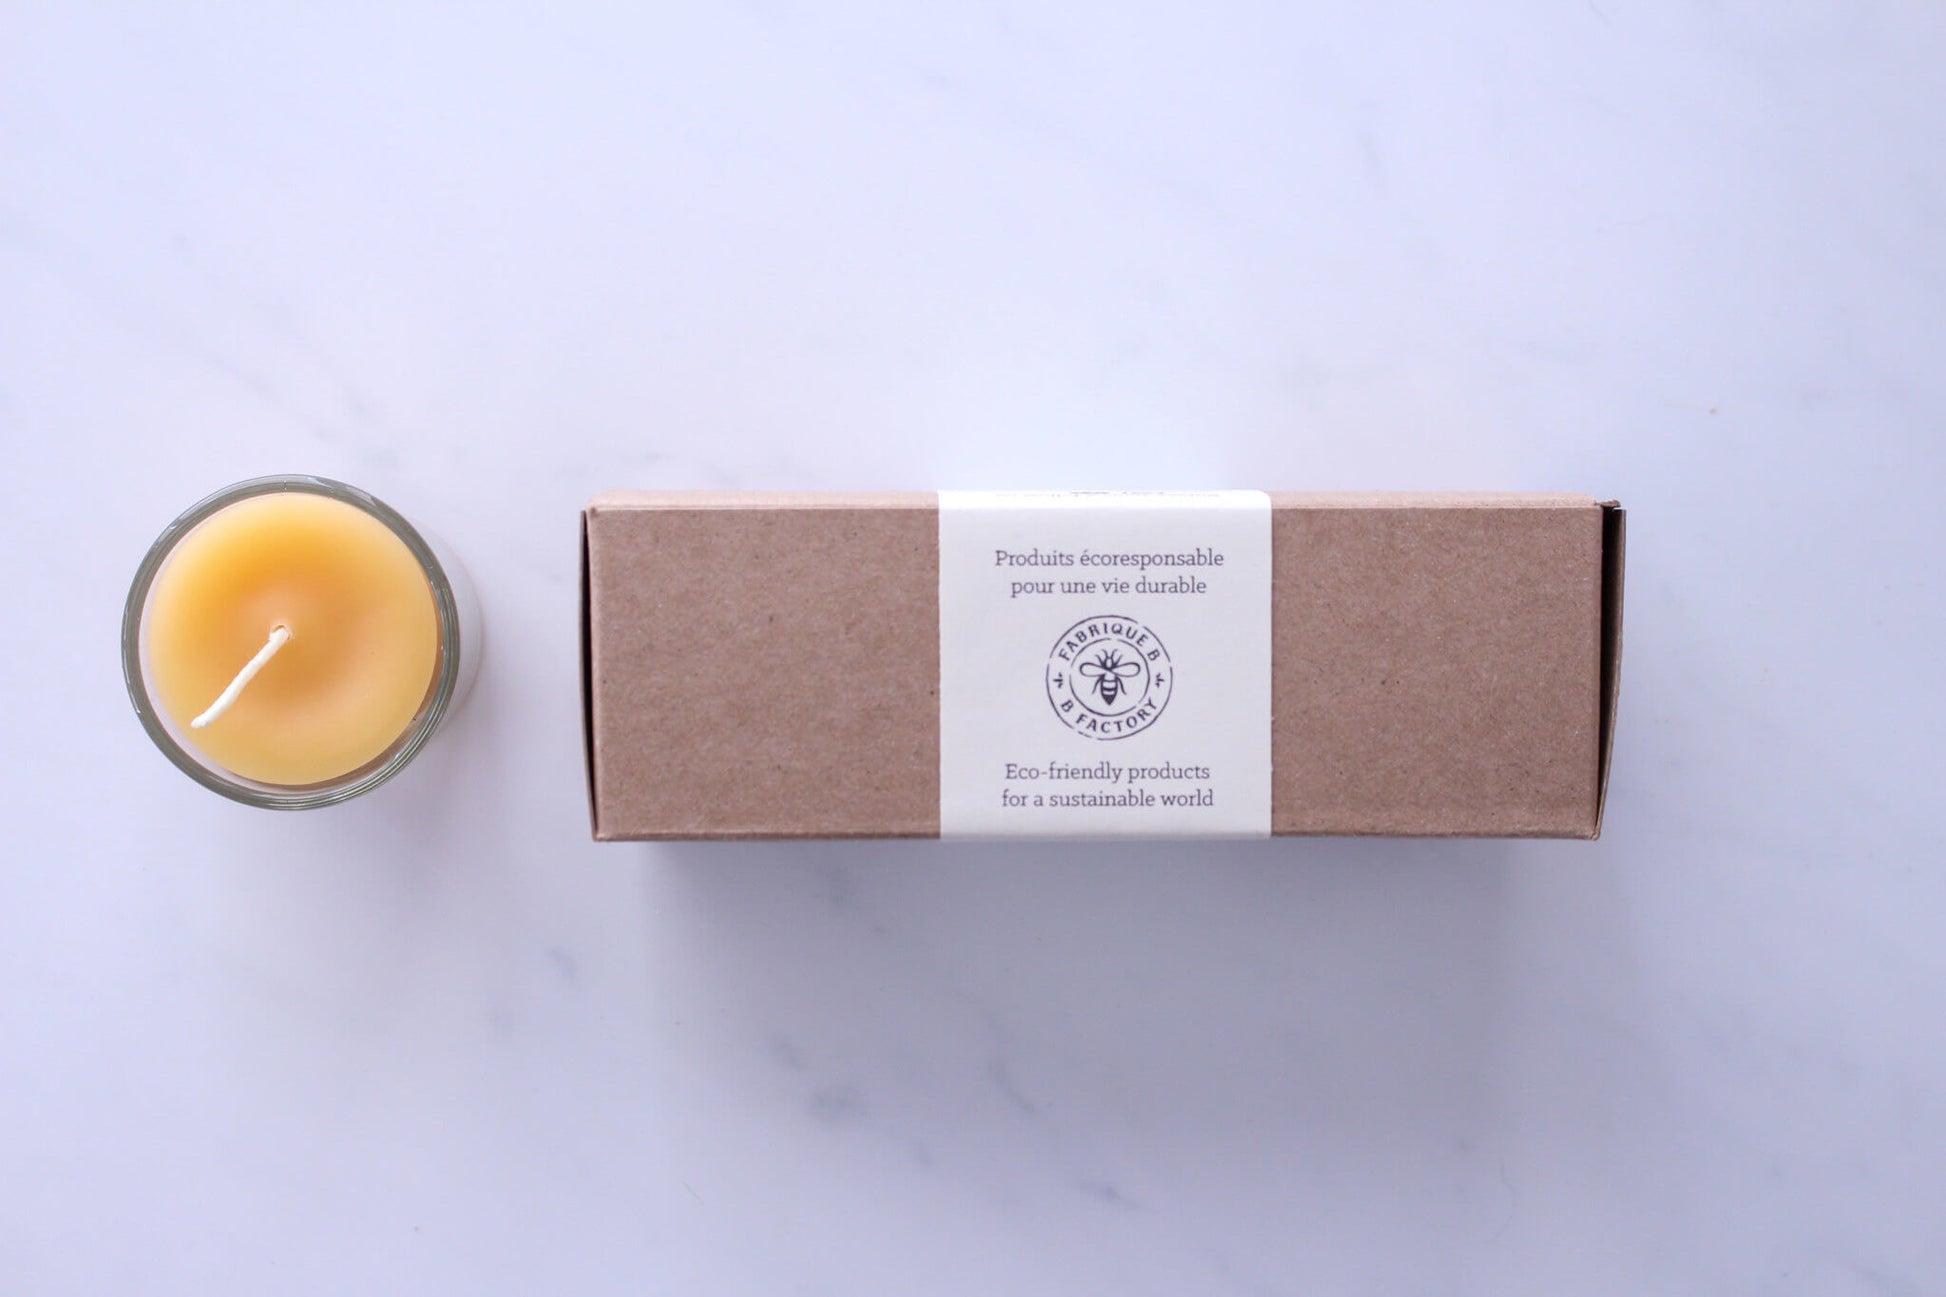 Pure beeswax votive candle in glass holder beside 3 beeswax votive candles in gift box with B Factory logo on lid 